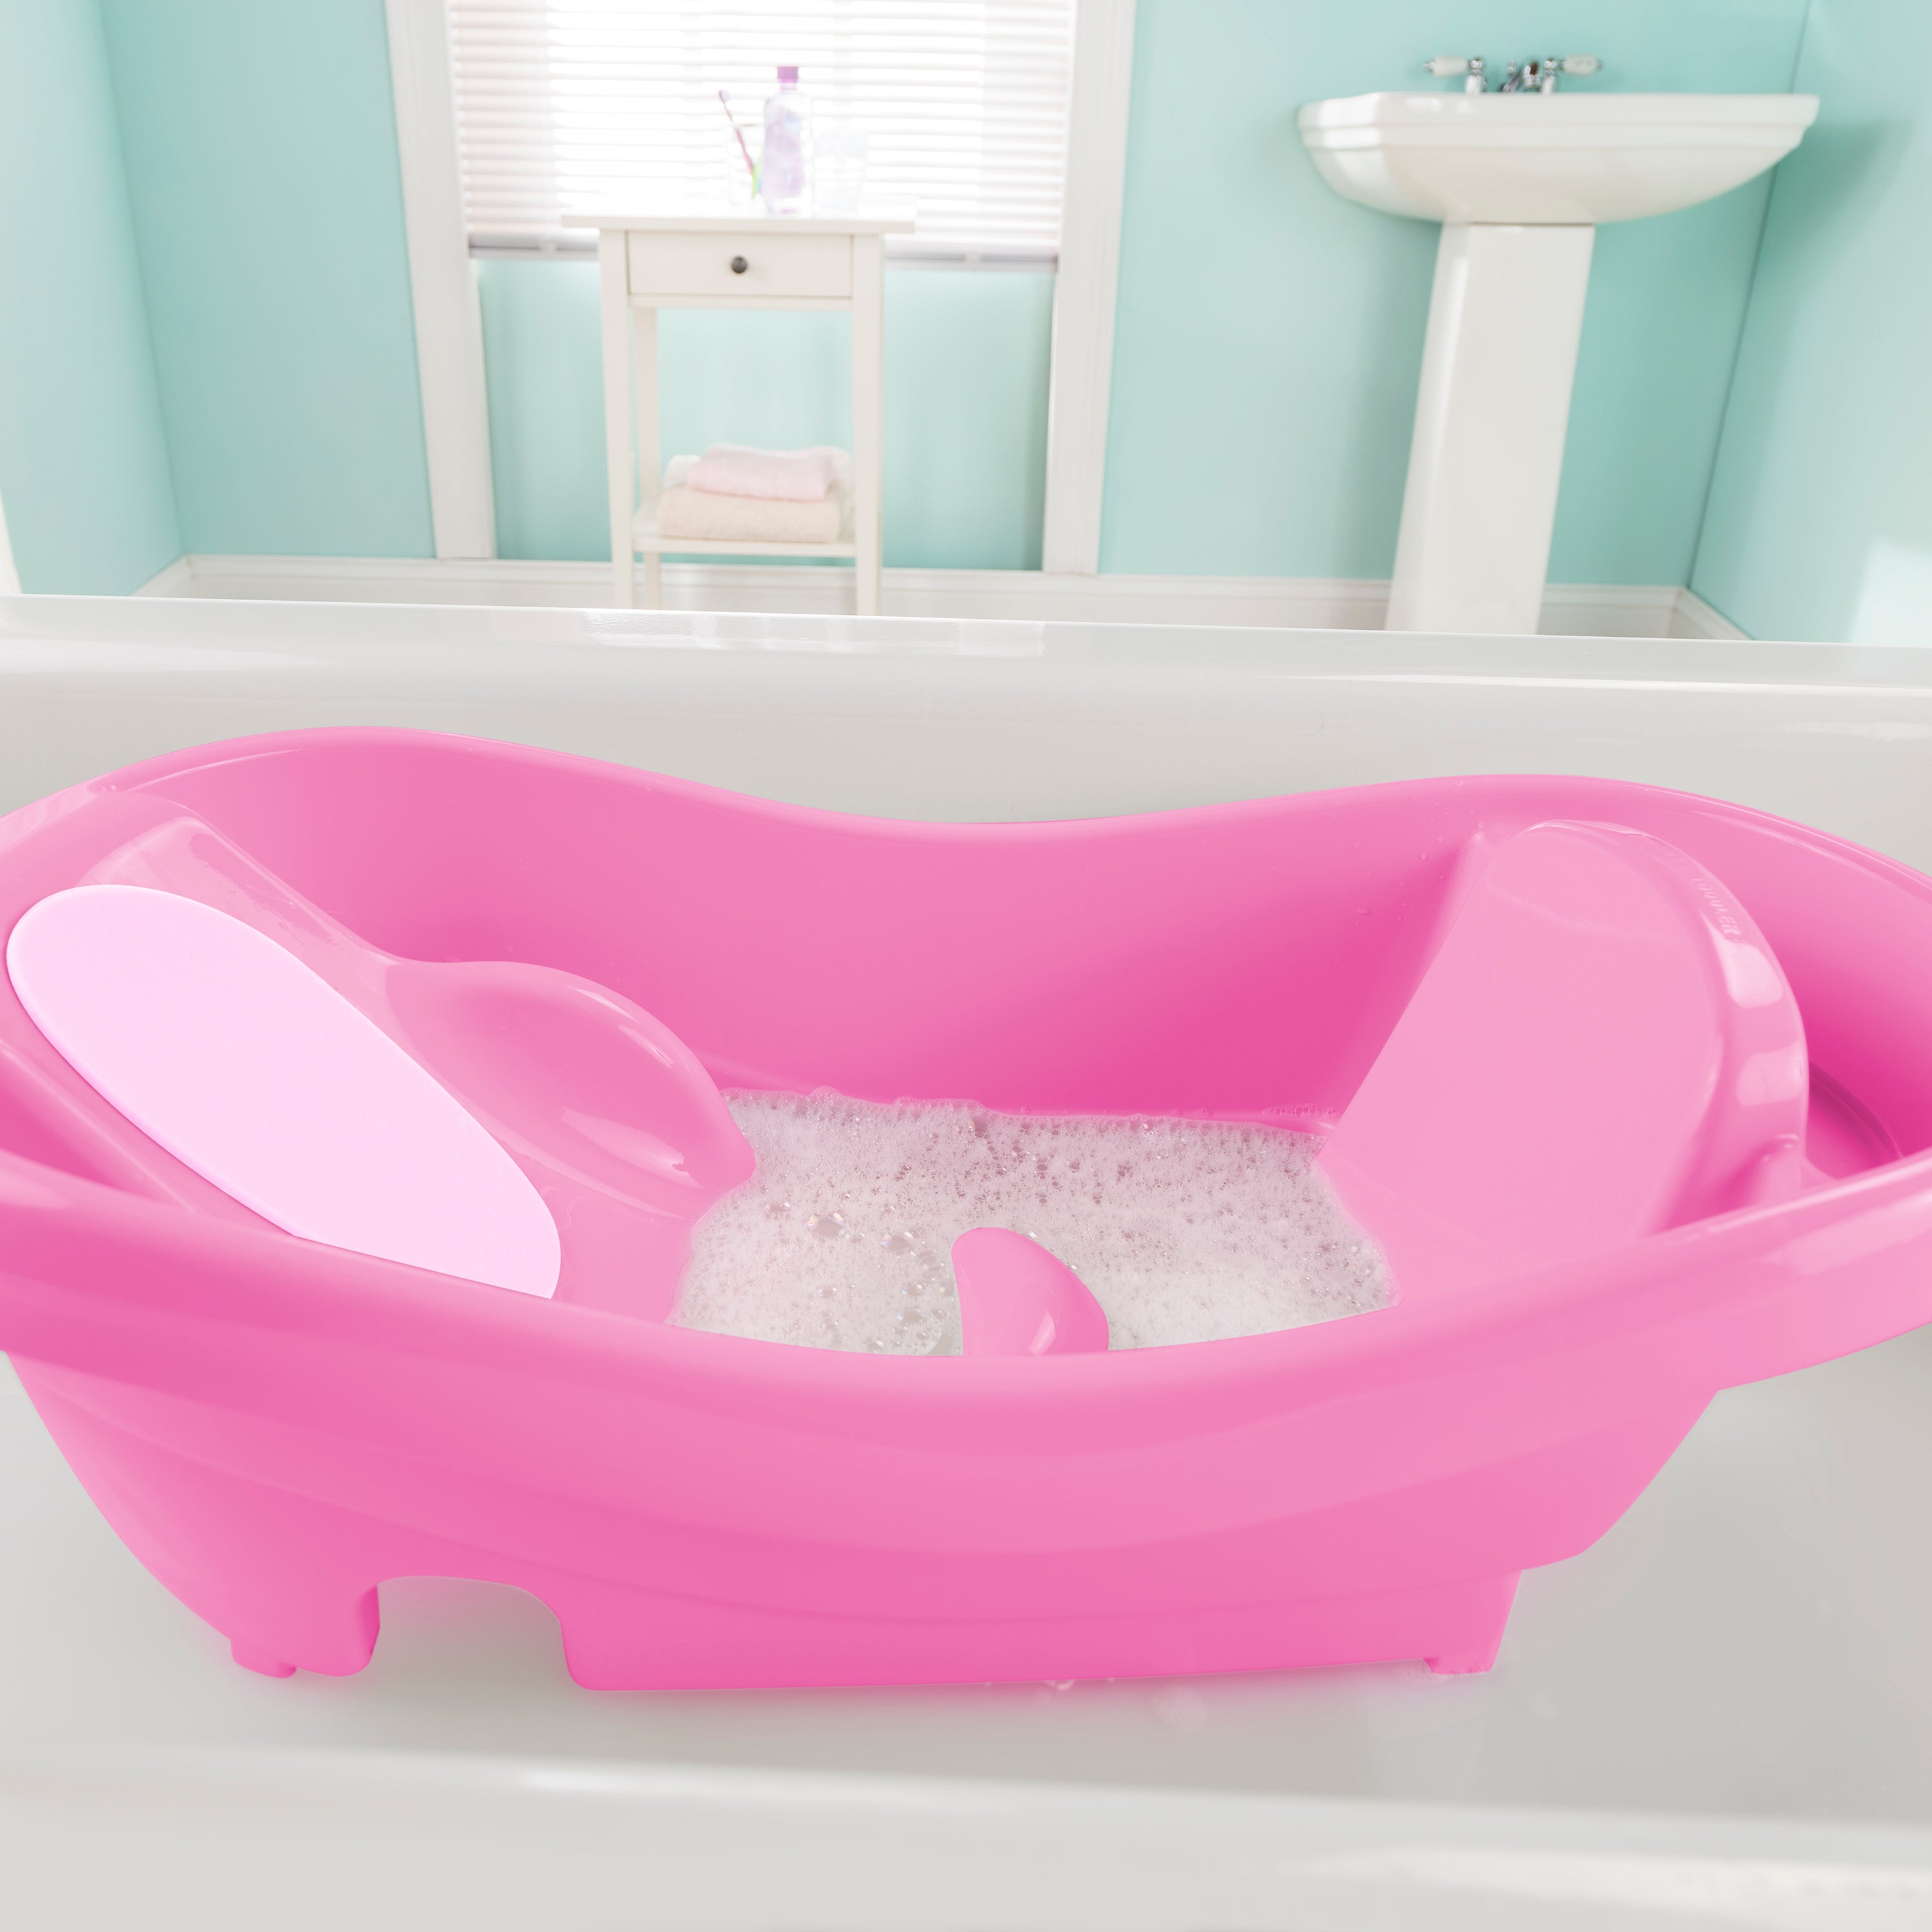 Comfy Clean Deluxe Newborn To Toddler Tub - Girl